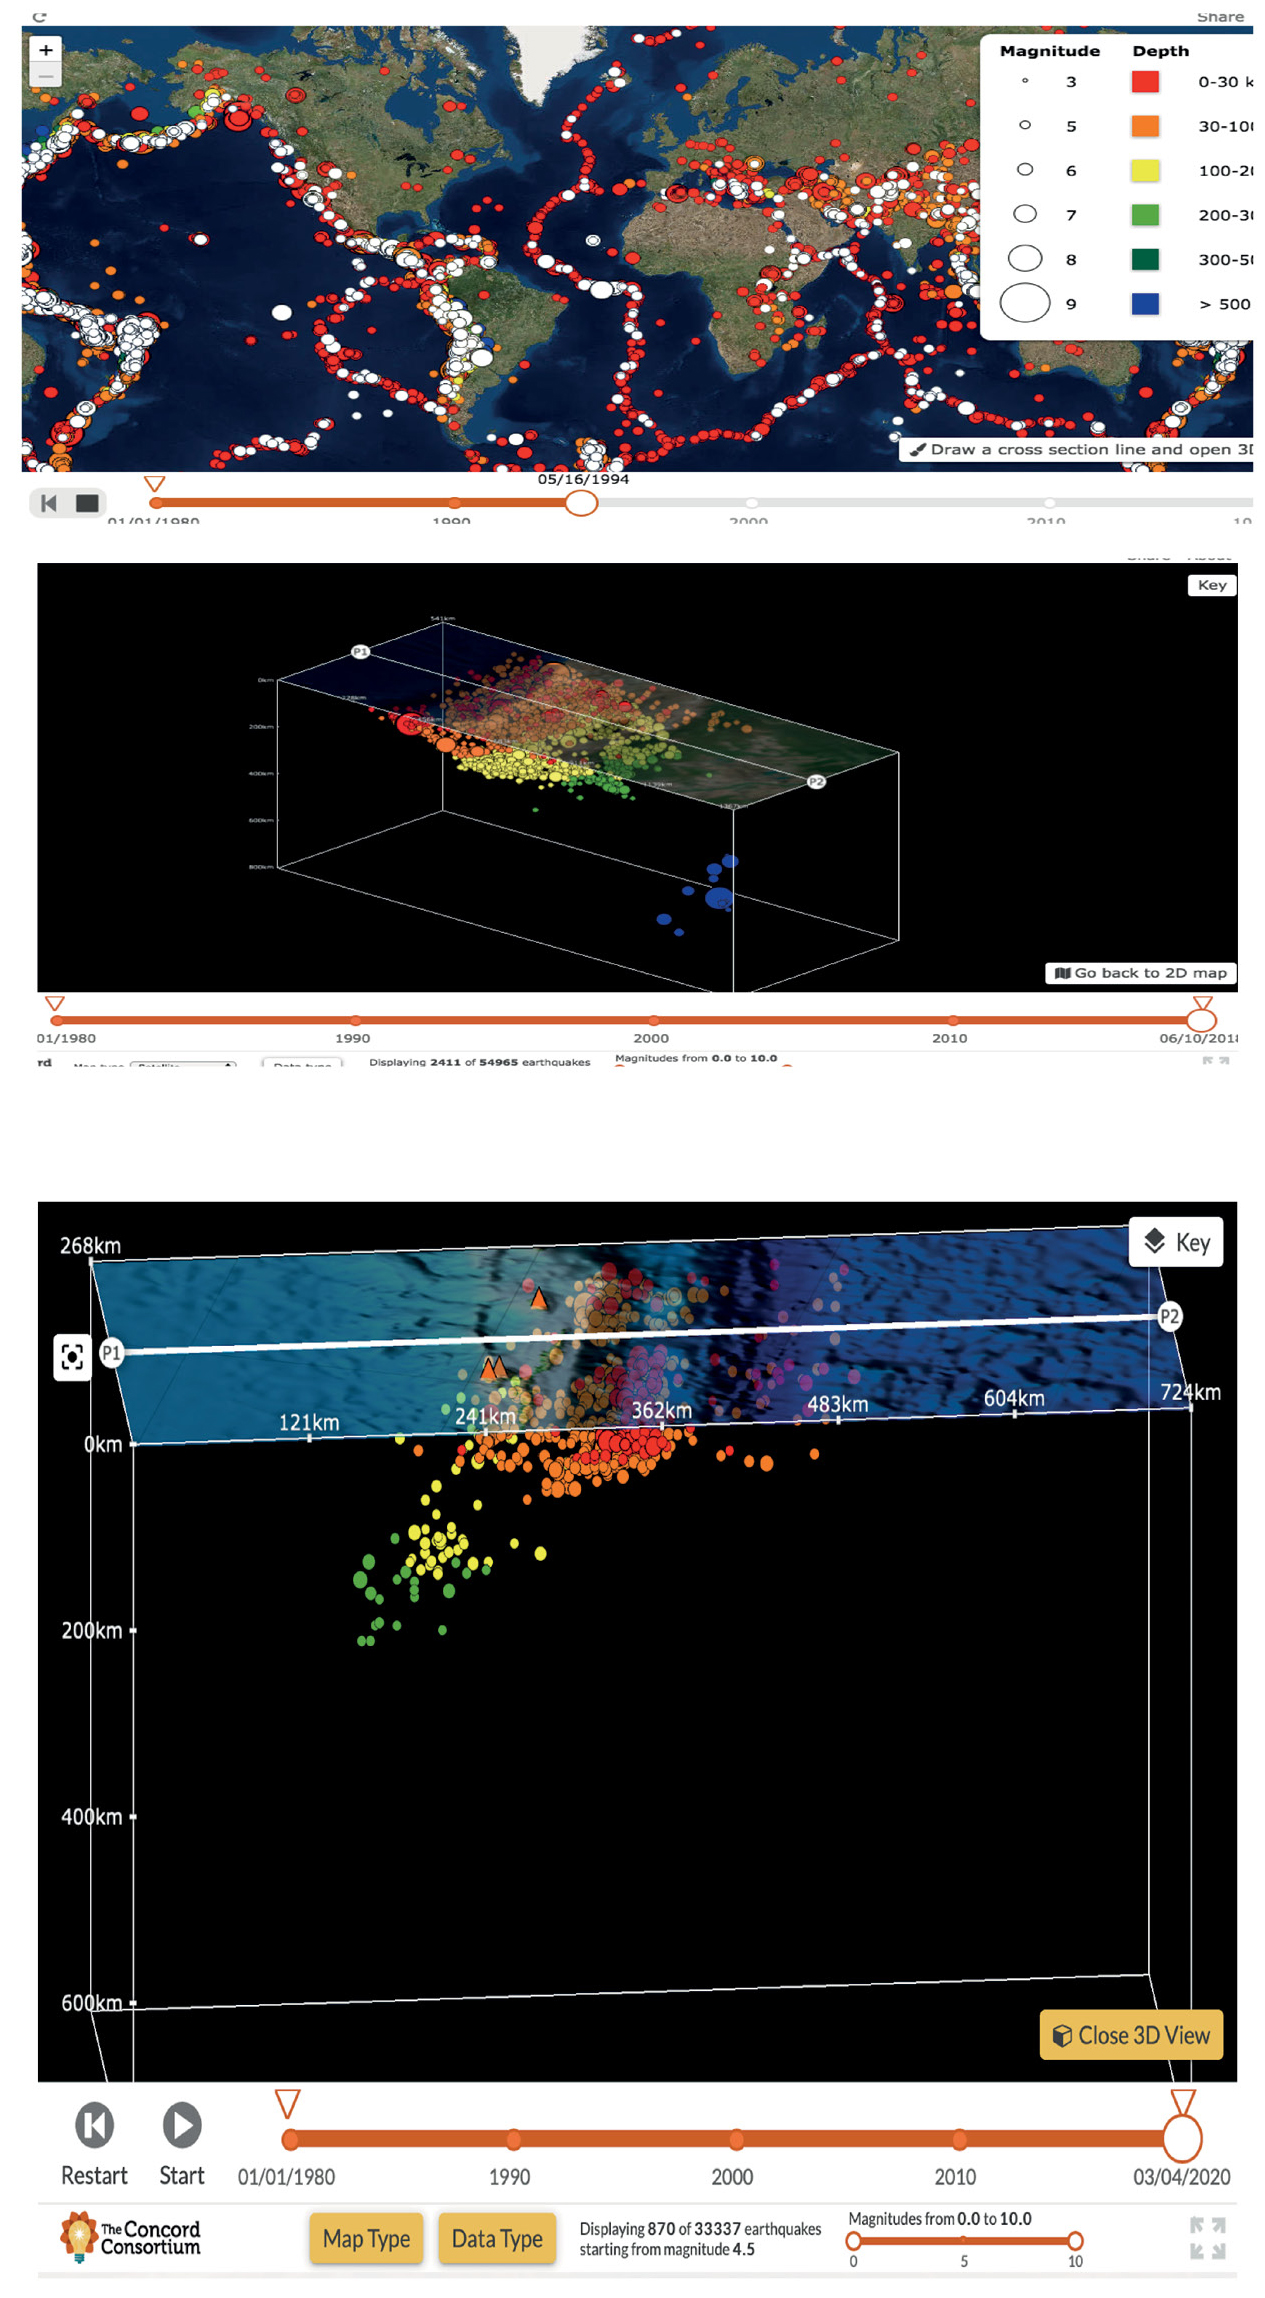 Figure 1  Seismic Explorer. TOP: Main view on the left and cross section tool on the right. Students have the option to select on the main view where to construct the cross section, essentially giving them access to a cross section they can rotate and view at different angles at any location on earth. BOTTOM: Sample cross-sectional view of the Aleutian Island chain (Concord Consortium, 2019).